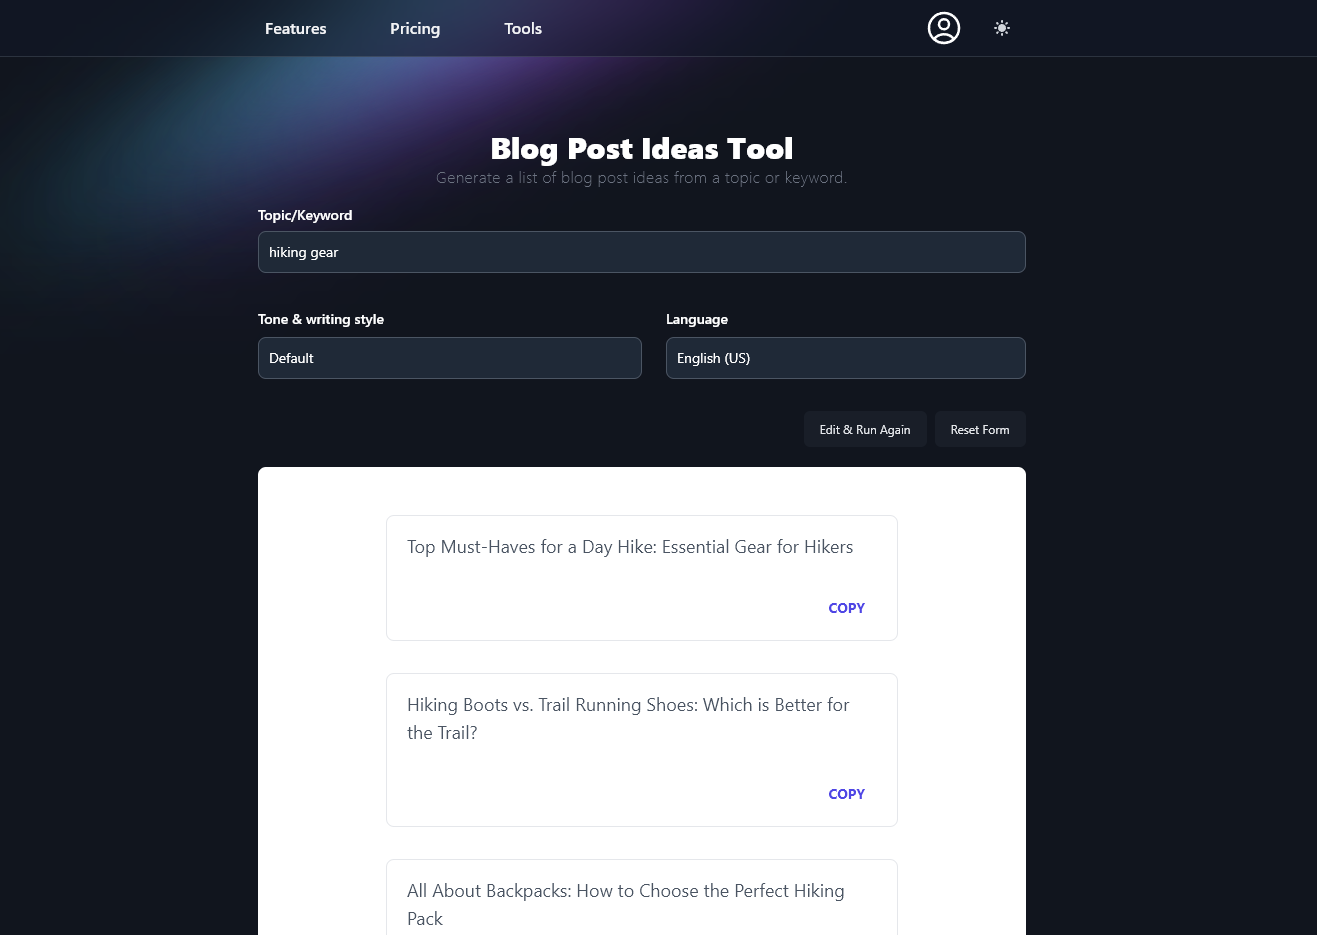 AI Blogging Tool for Post Ideas, Screenshot Showing Keyword Hiking Gear and 3 Generated Ideas - Top Must-Haves for a Day Hike: Essential Gear for Hikers; Hiking Boots vs. Trail Running Shoes: Which is Better for the Trail; and All About Backpacks: How to Choose the Perfect Hiking Backpack